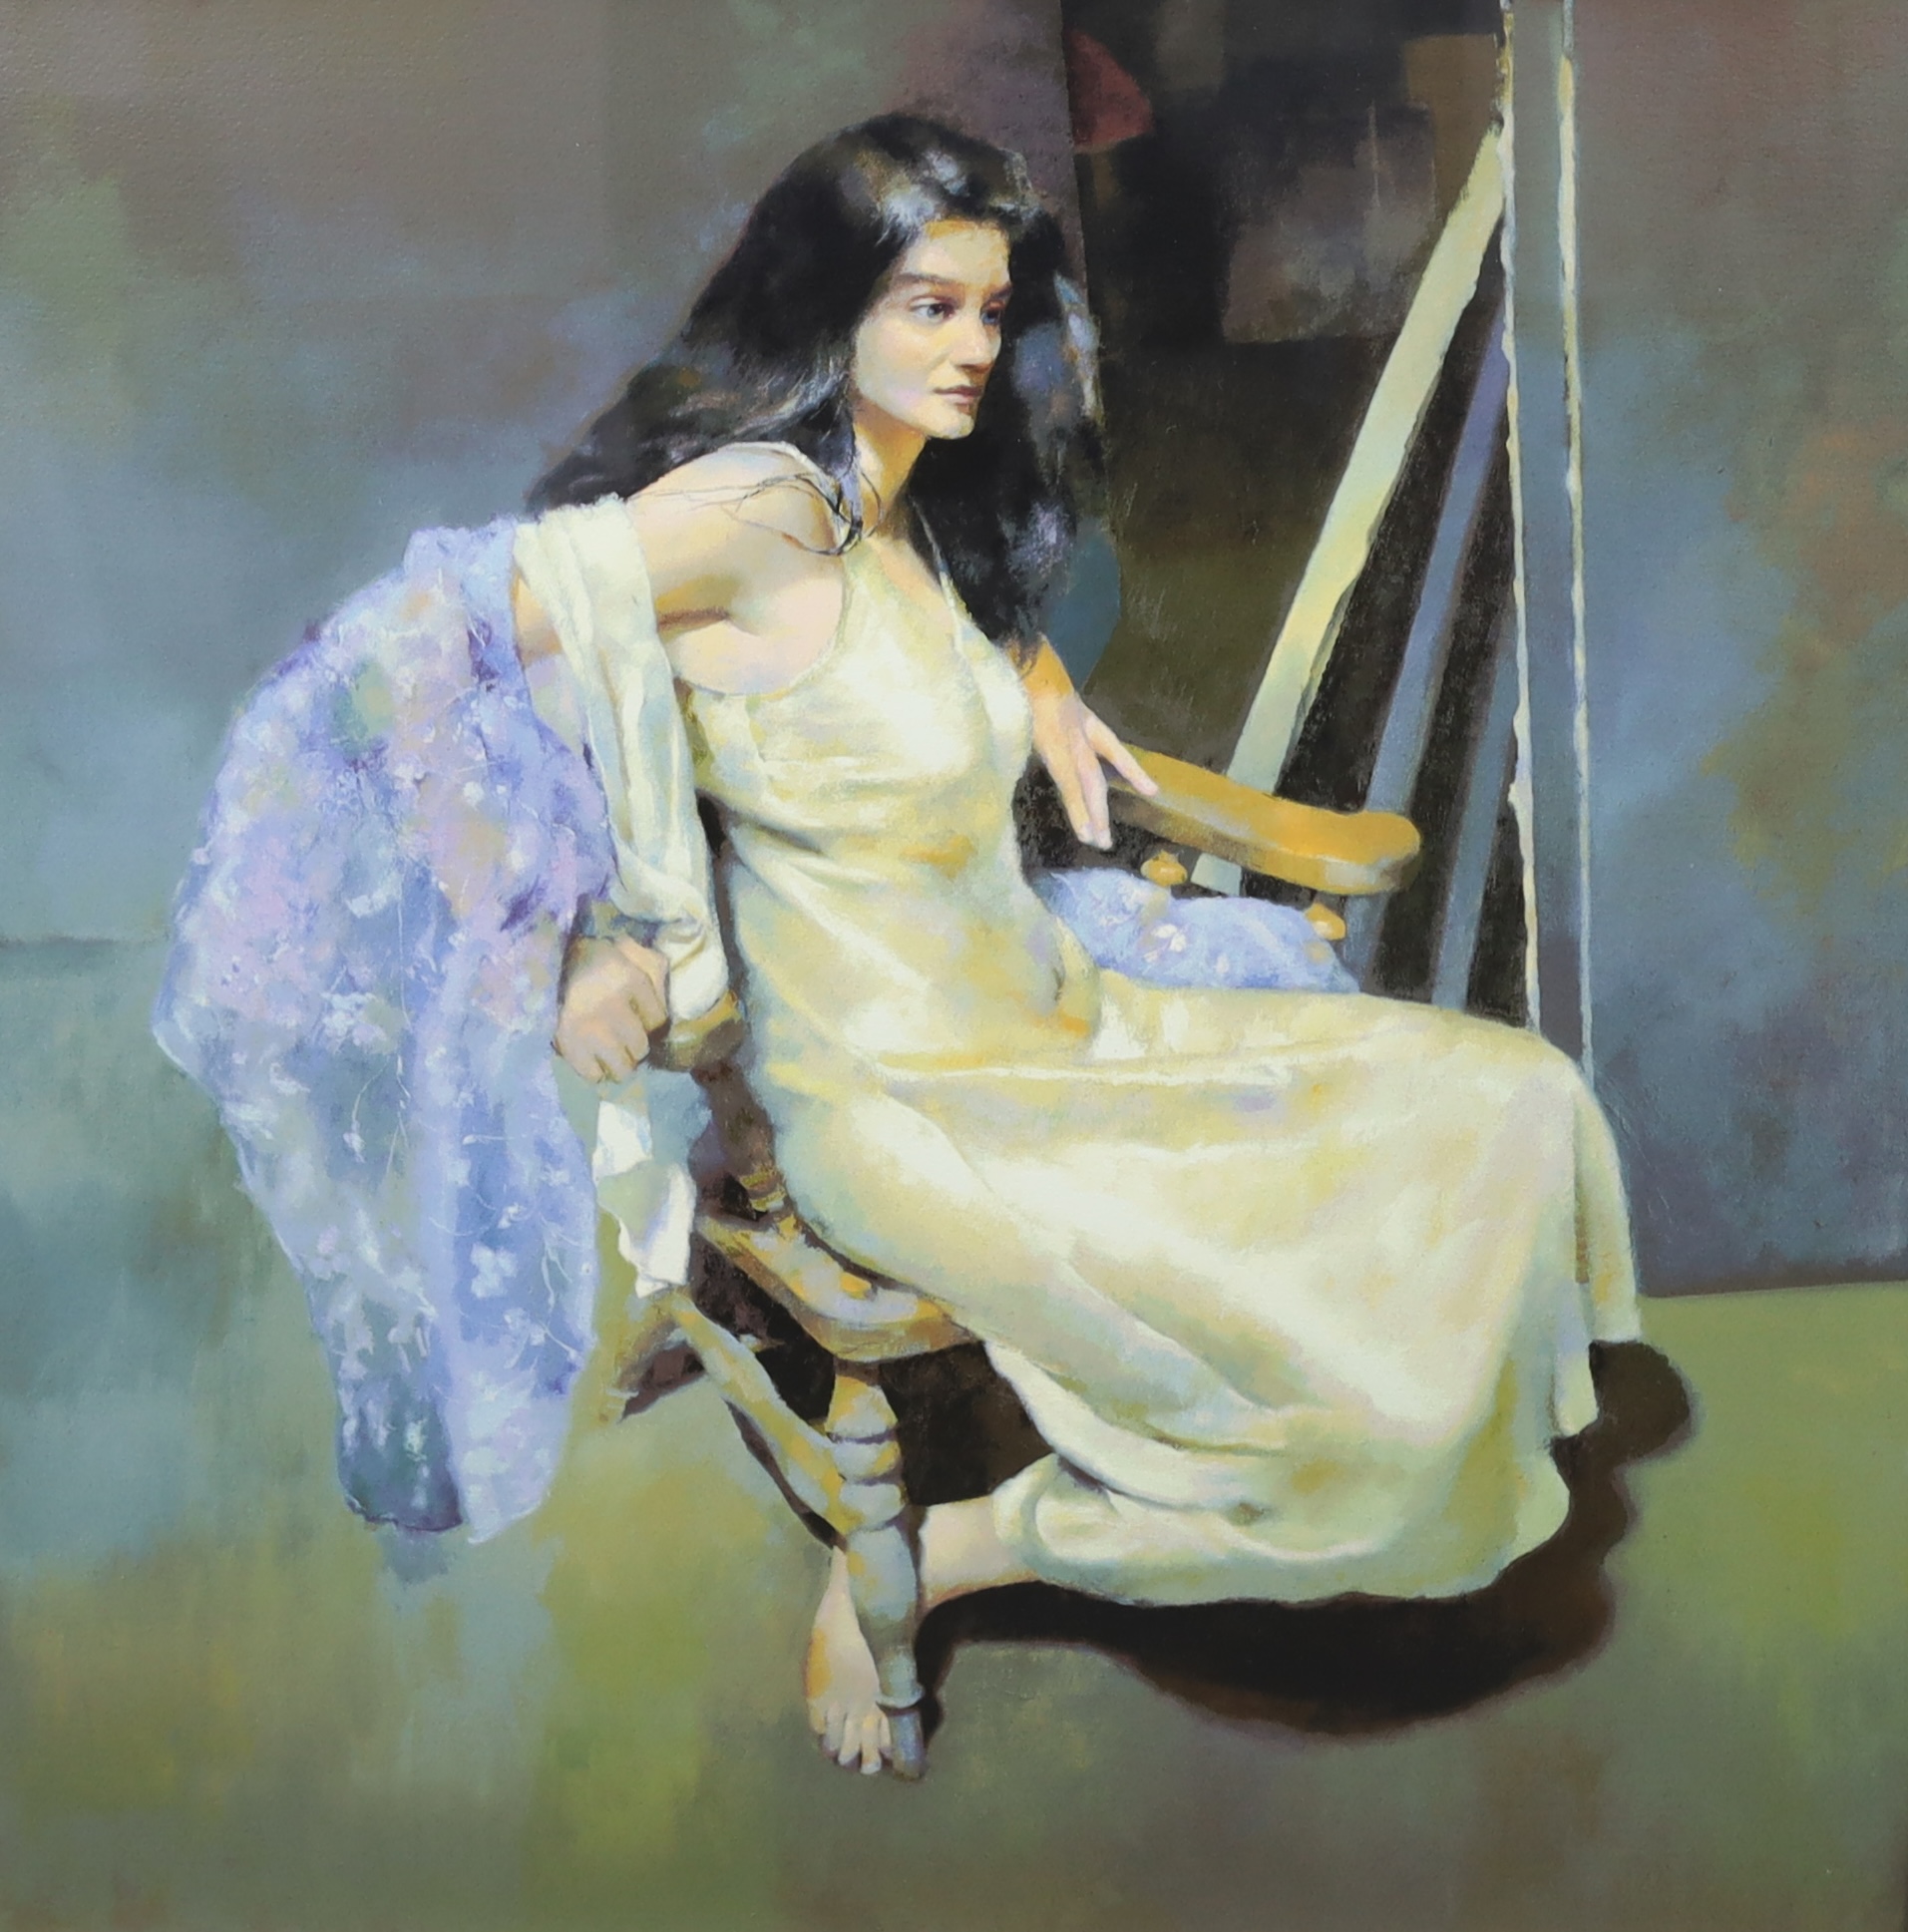 Robert Lenkiewicz (1941-2002), silkscreen, 'Ester seated by R.O. Lenkiewicz', signed in pencil and titled along with the name of the artist Ester Dallaunay, 11/475, 60 x 60cm. Condition - good, has slipped slightly in th